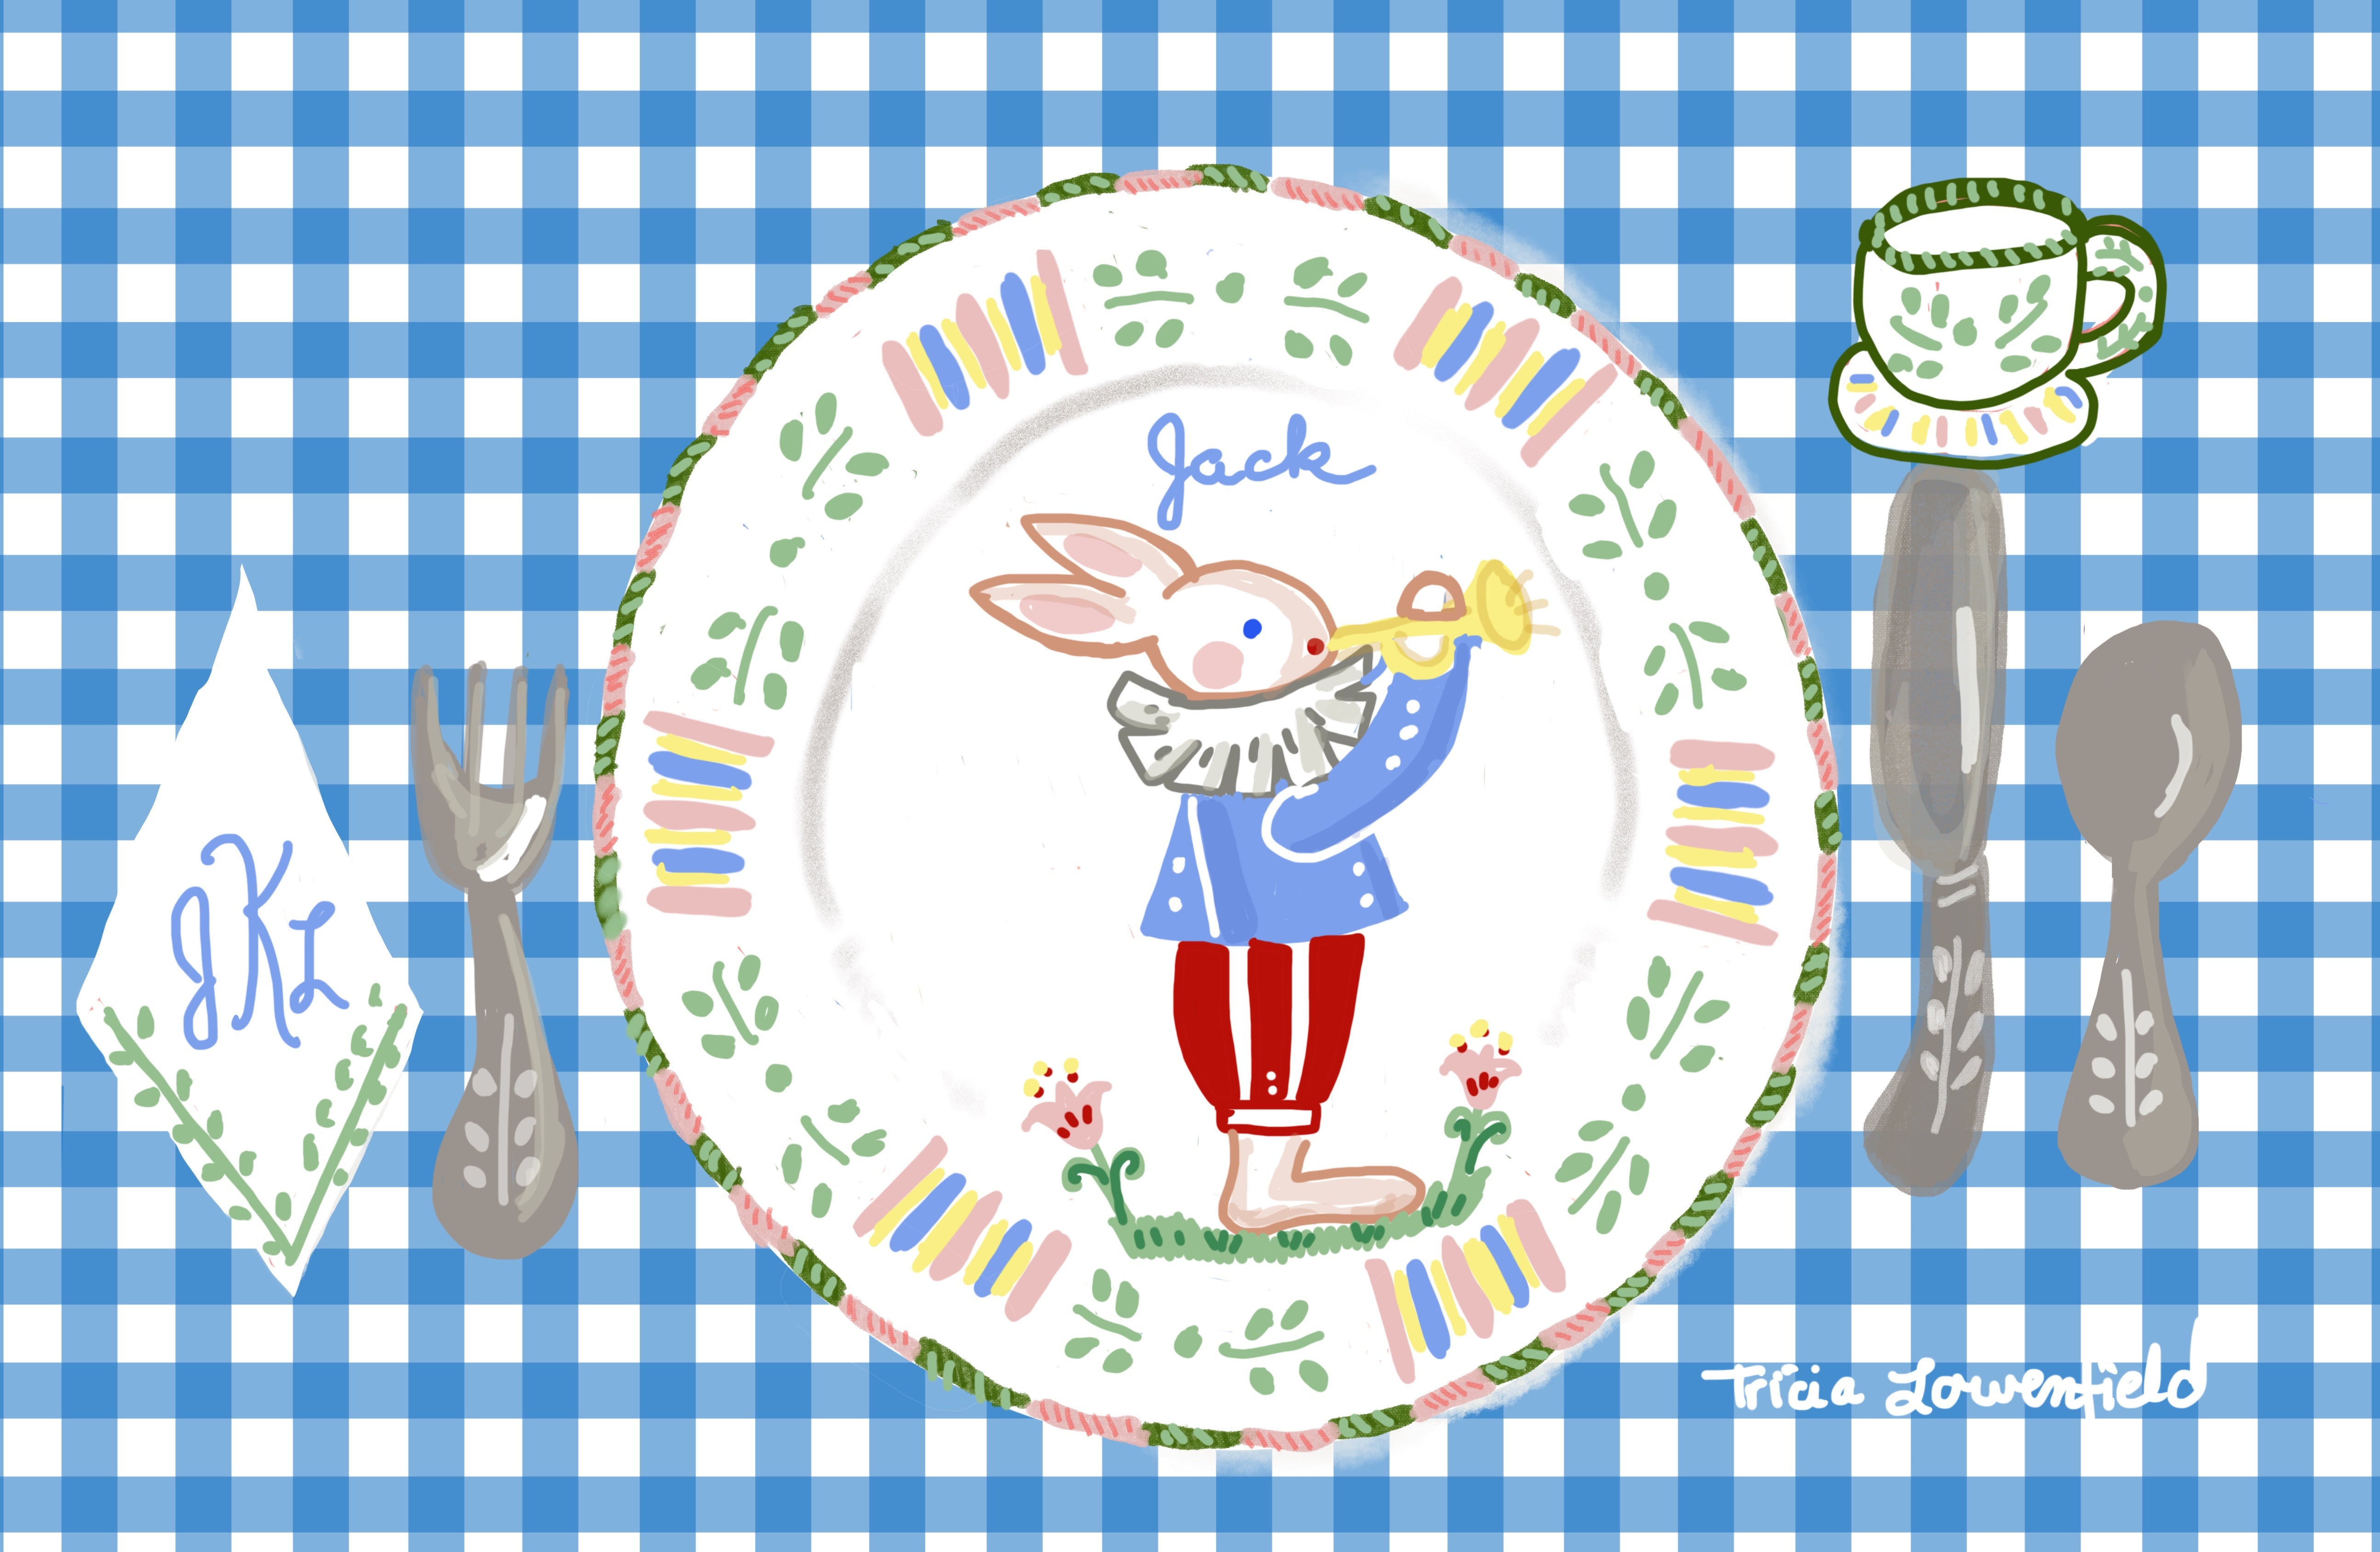 Blue Gingham Troubadour Bunny Placemat (personalized) - Premium Placemat from Tricia Lowenfield Design 